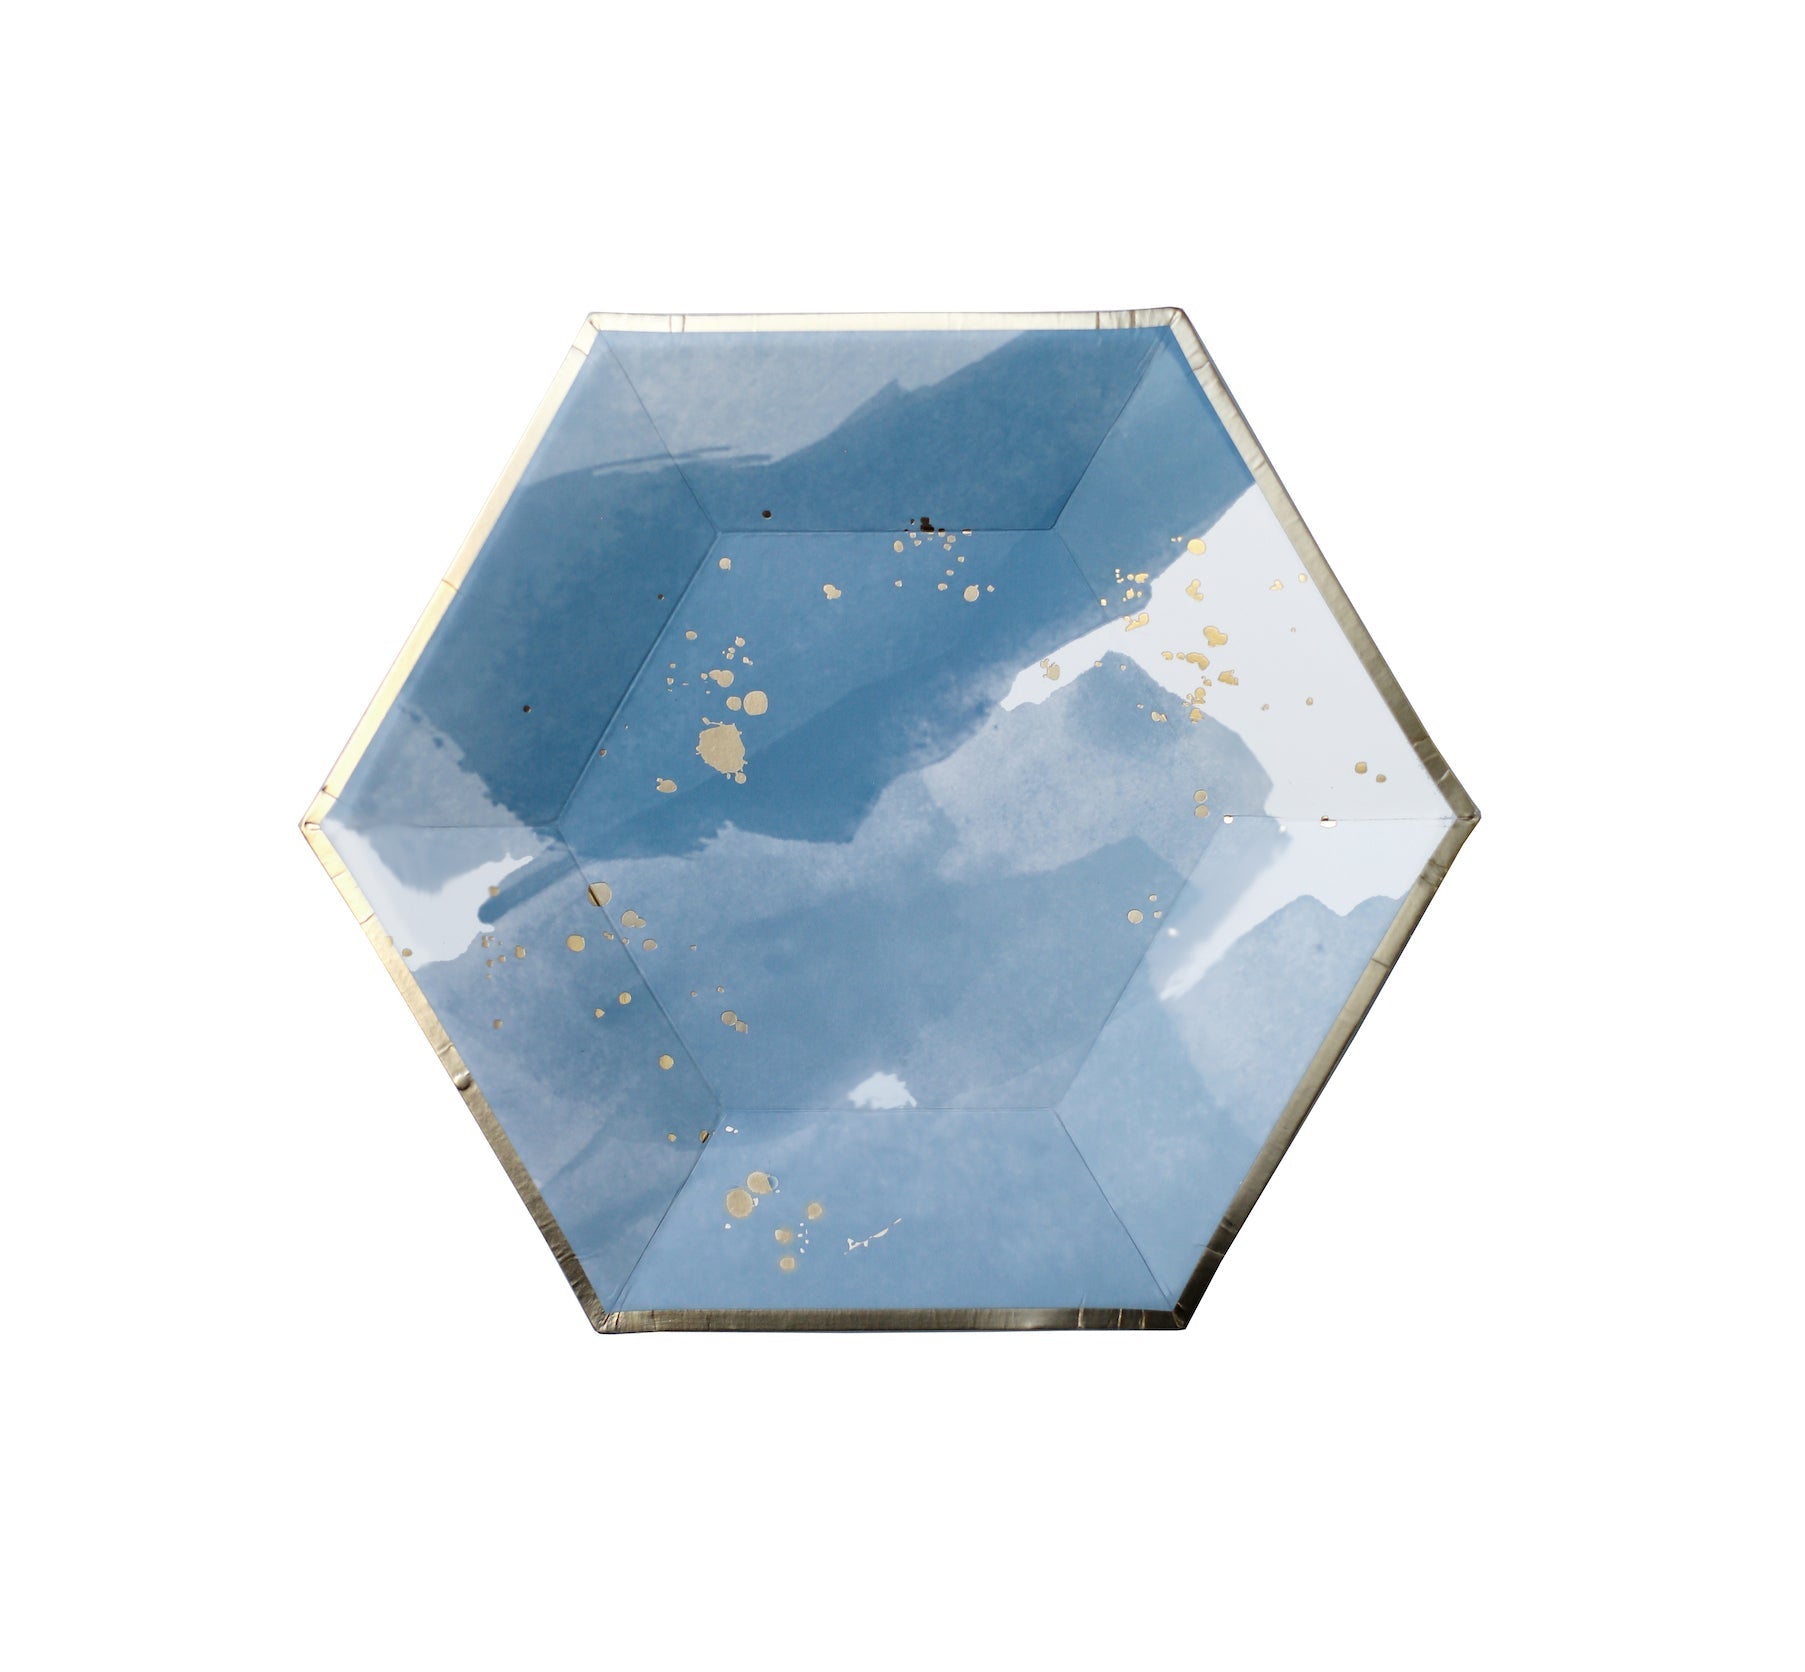 Blue Gold Hexagon Party Plates Small - Dessert Plates Appetizer Plates Cake Plates - Harlow & Grey Malibu Tableware - Baby Boy Shower Decoration, Blue Bohemian Partyware Supplies, Boy First Birthday Party Tableware, Bridal Shower 